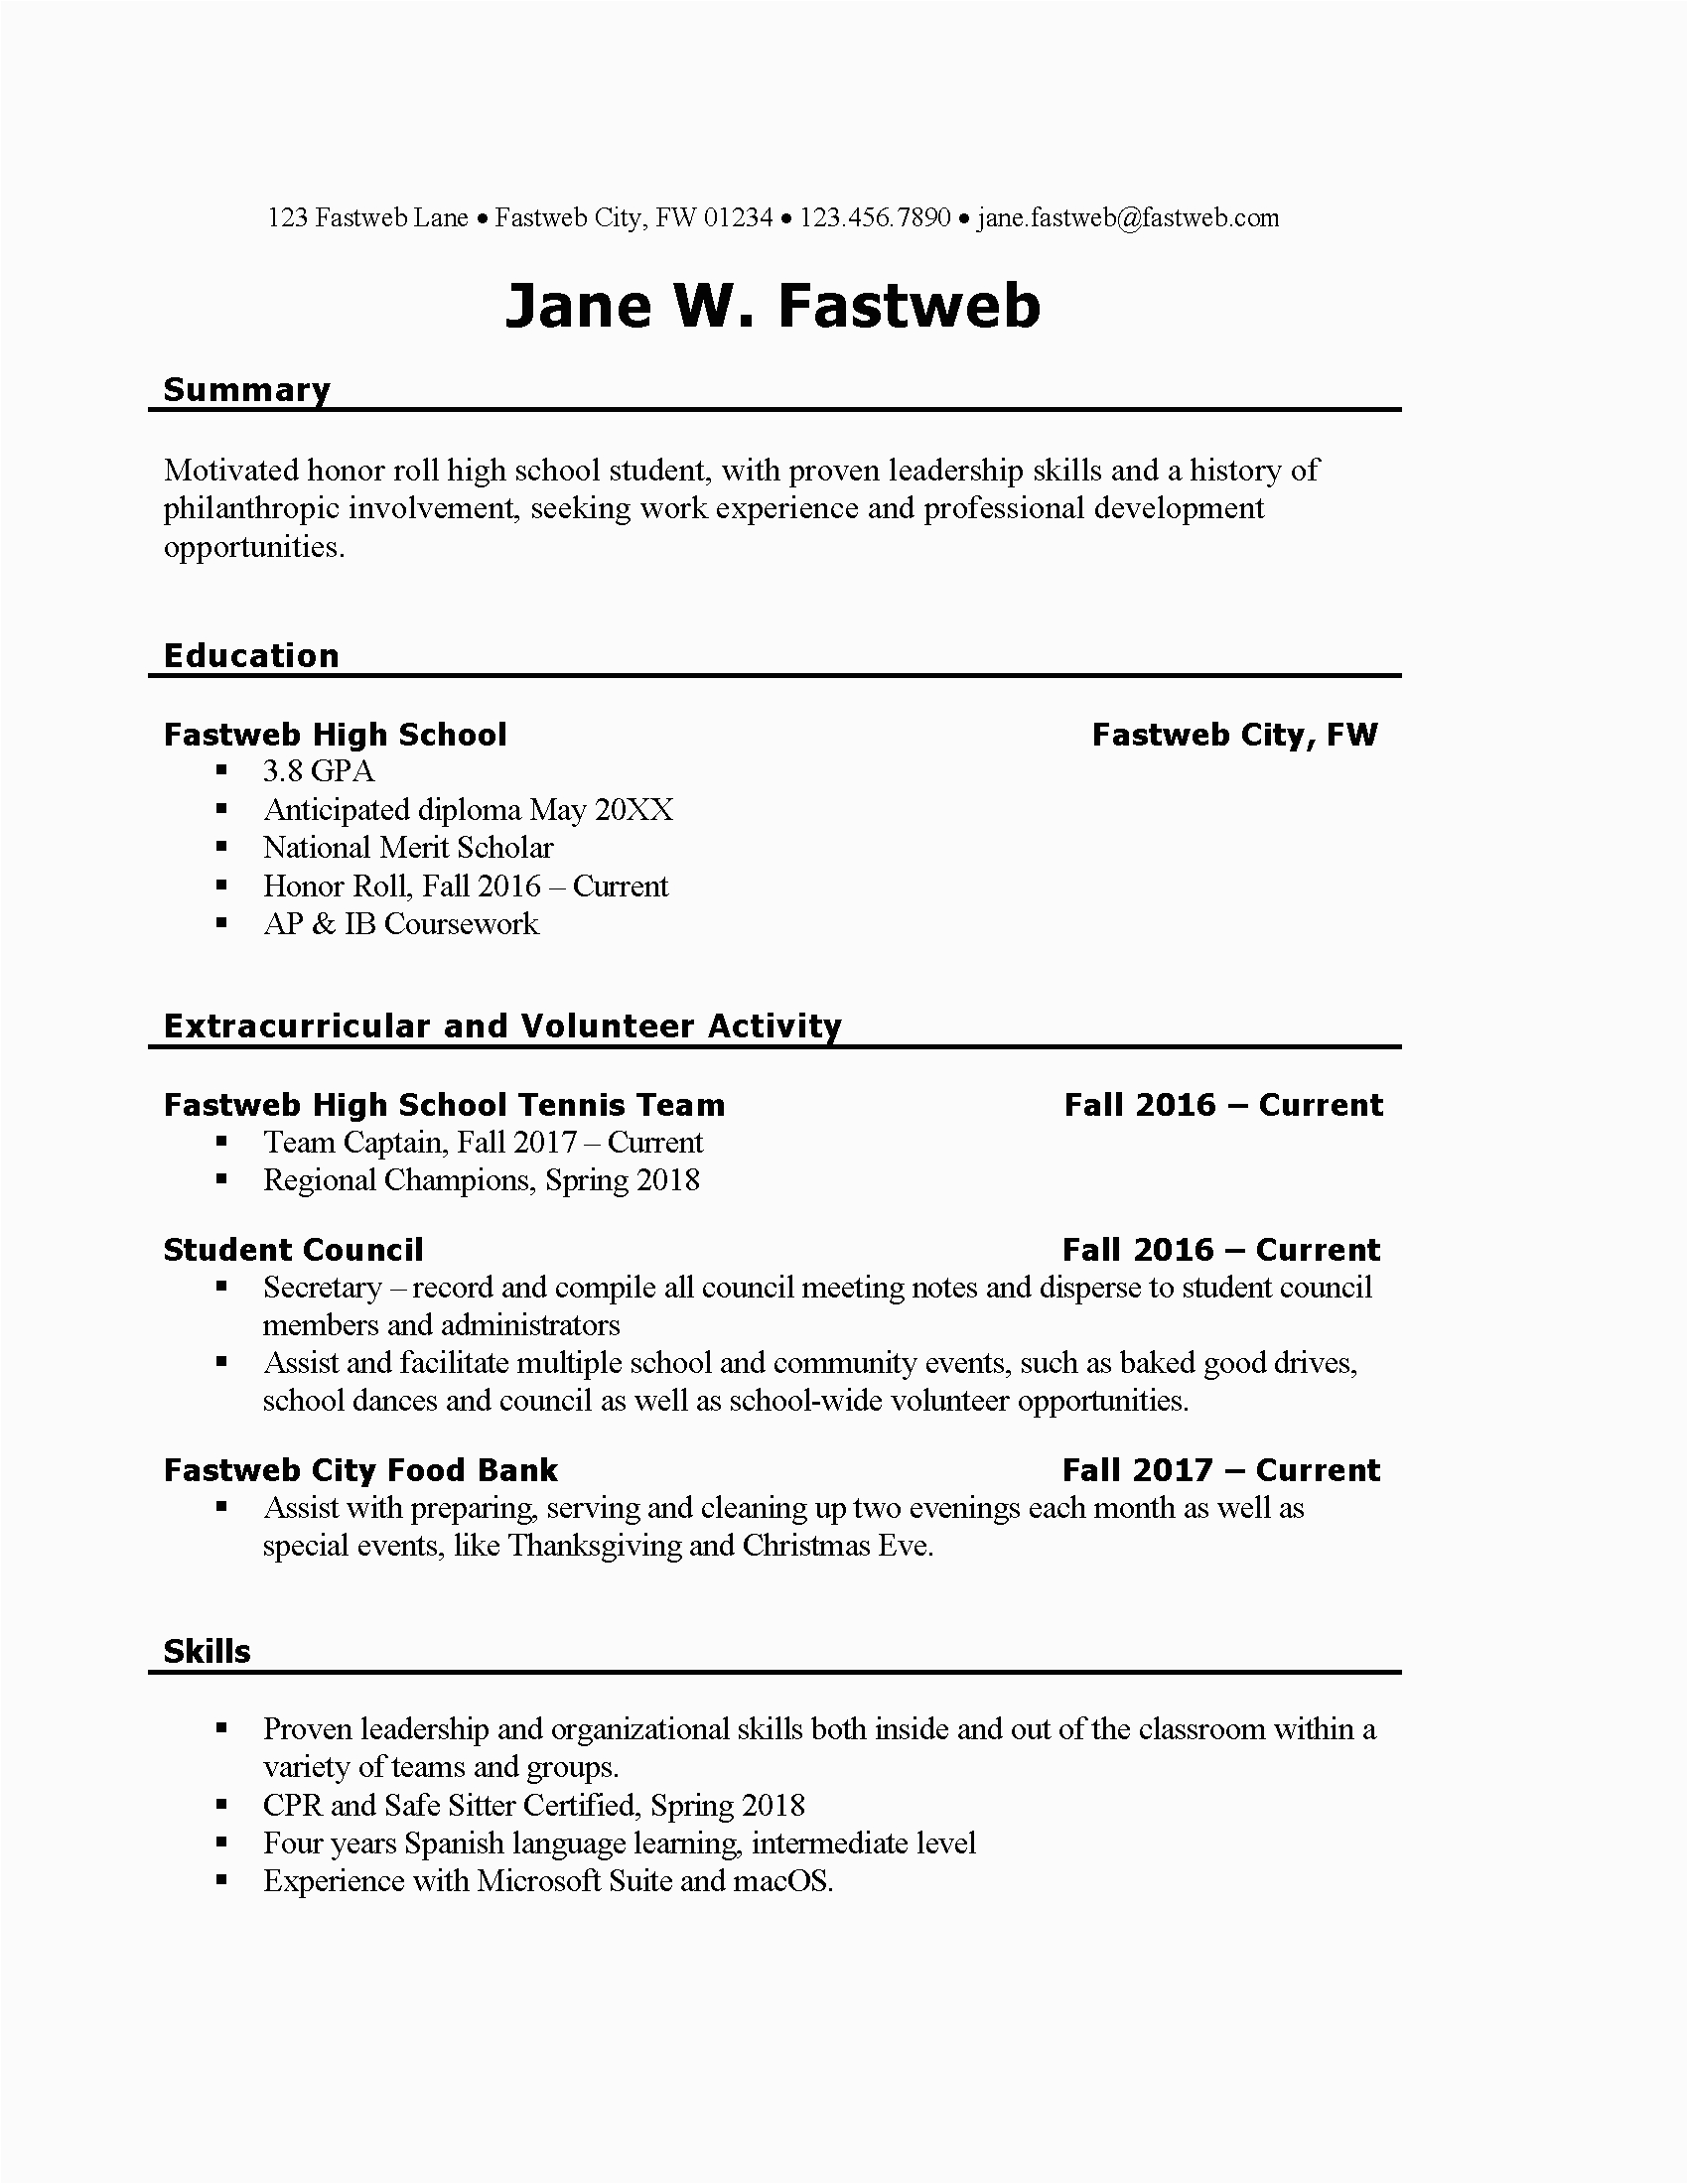 Resume for Part Time Job Student Sample First Part Time Job Resume Sample